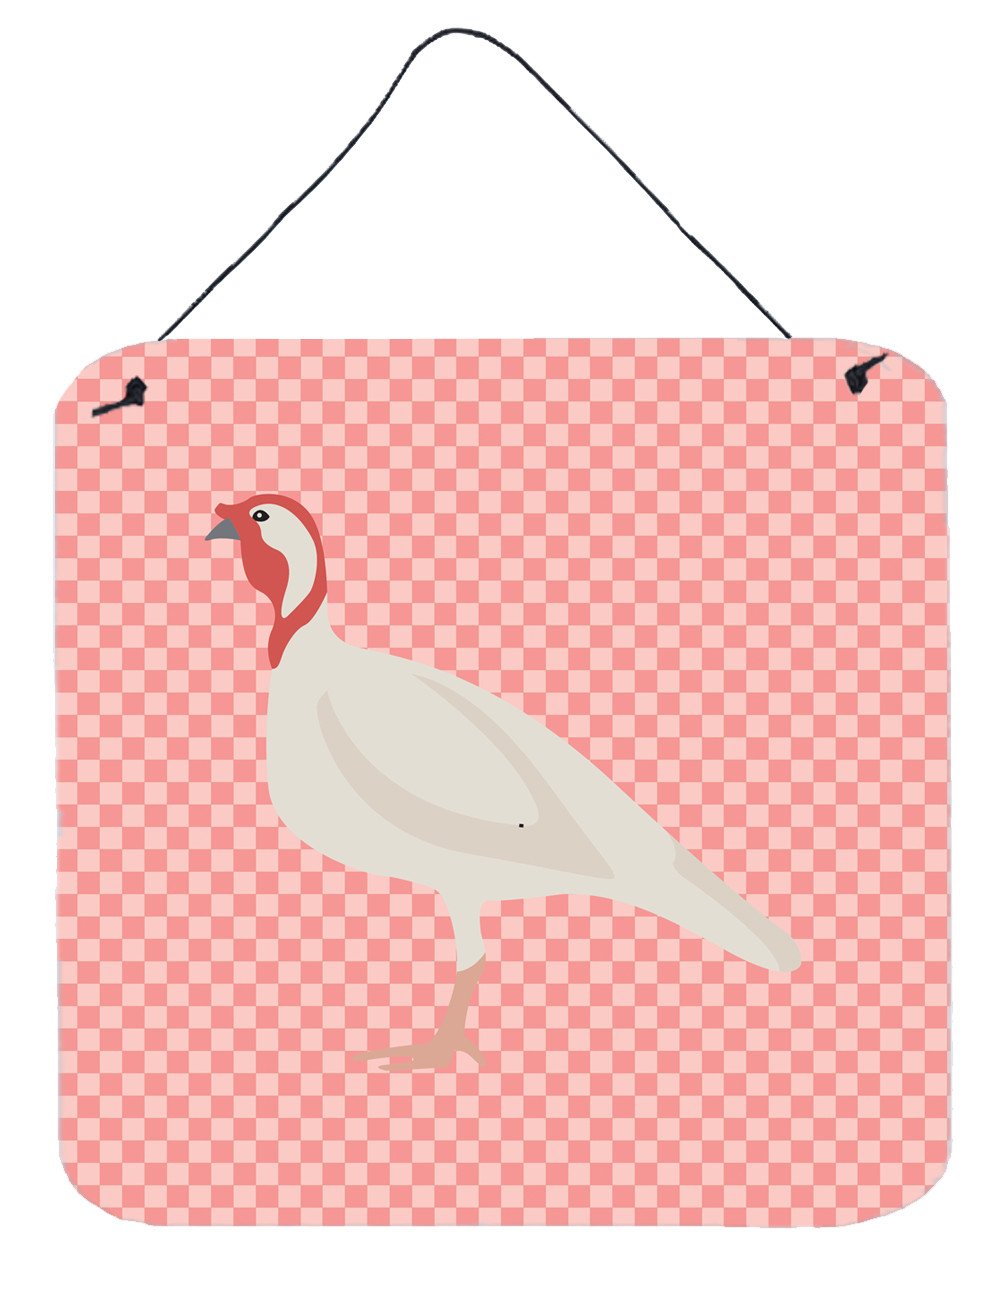 Beltsville Small White Turkey Hen Pink Check Wall or Door Hanging Prints BB7989DS66 by Caroline's Treasures